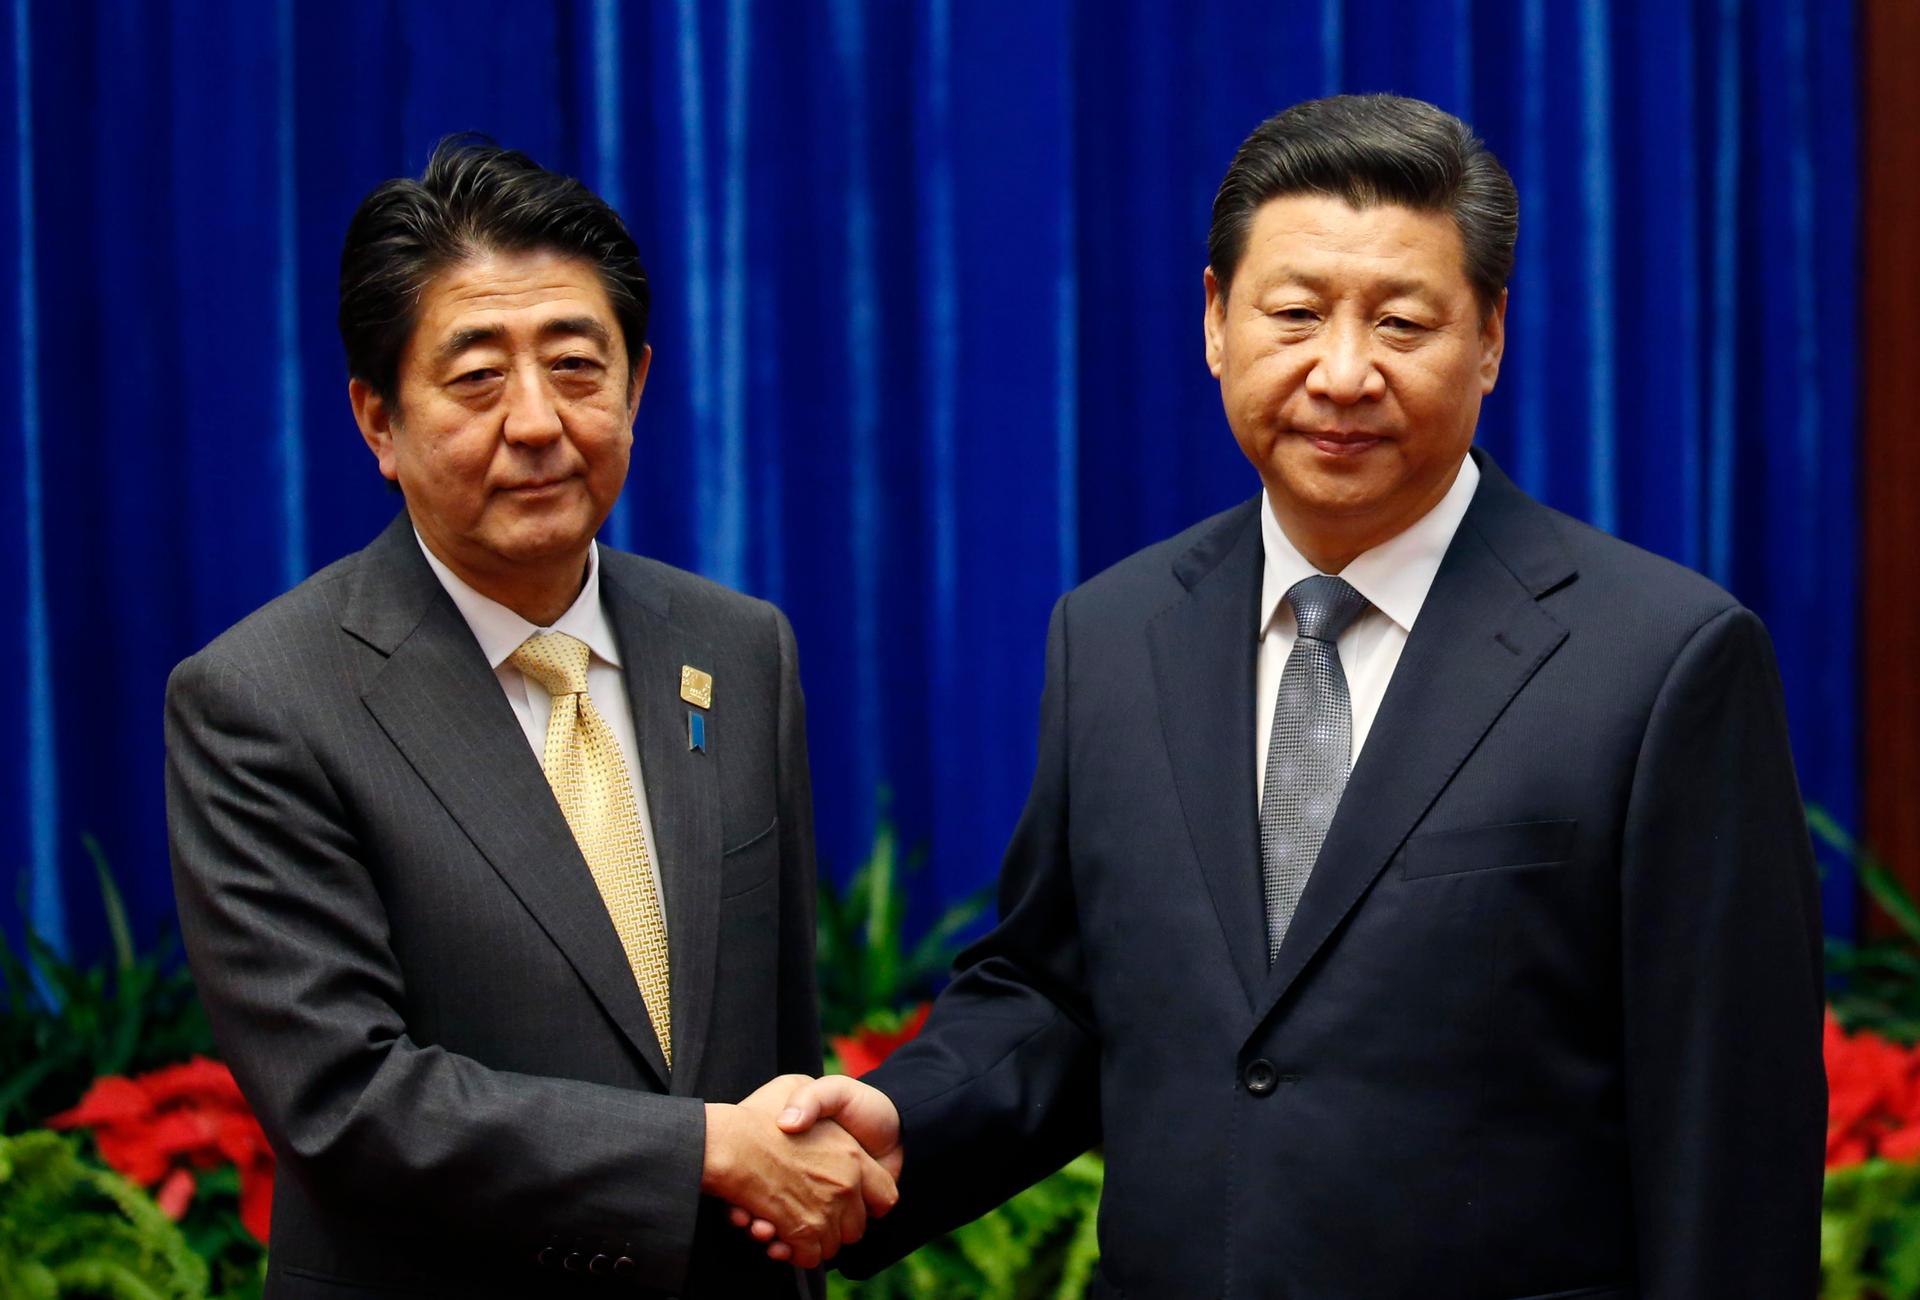 President Xi Jinping of China (on right) shakes hands with Japan's Prime Minister Shinzo Abe during their meeting on the sidelines of the Asia Pacific Economic Cooperation meetings in Beijing on Novemeber 10, 2014.